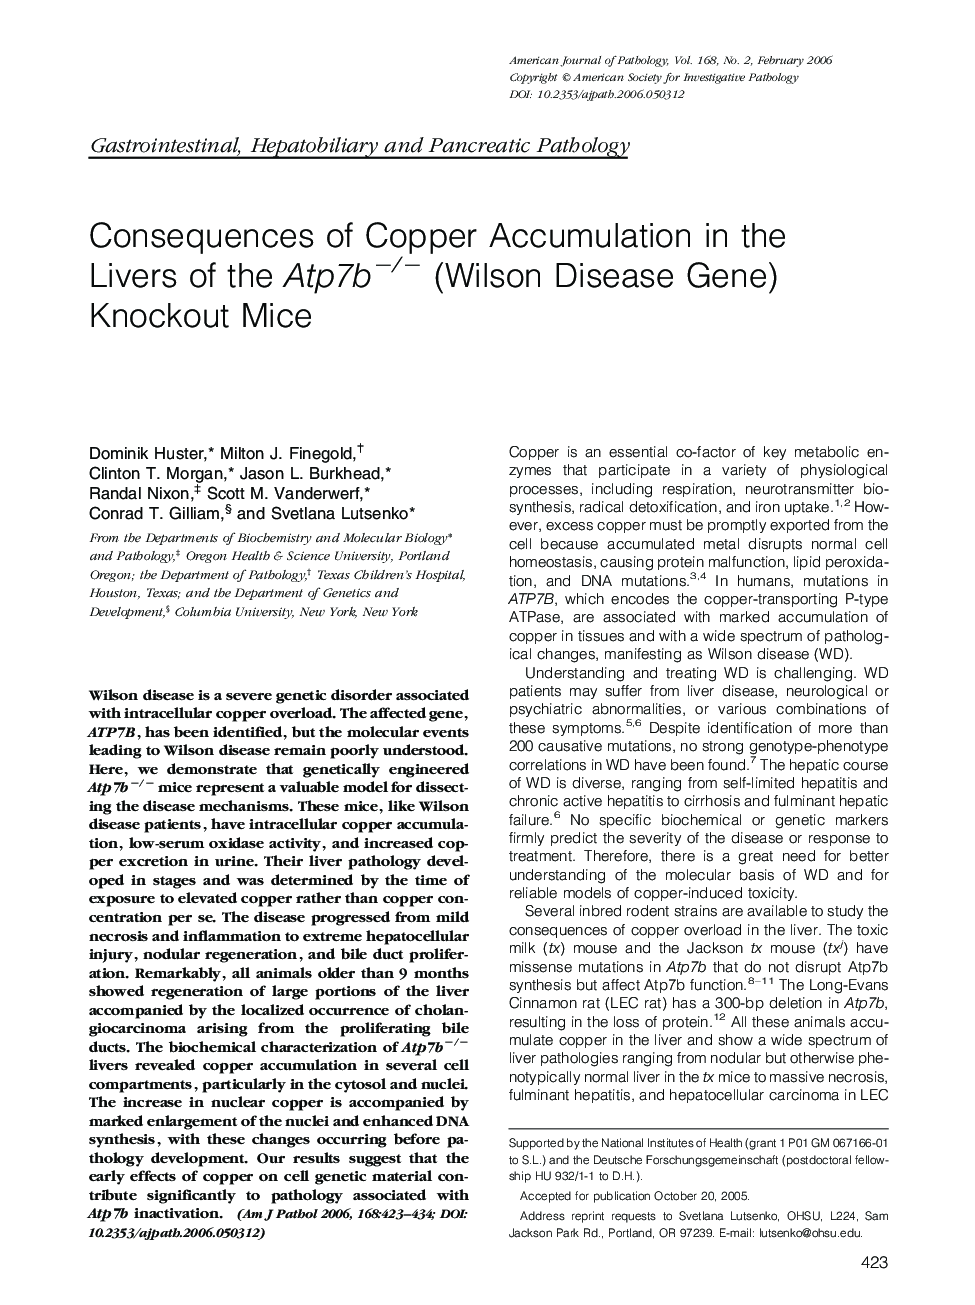 Consequences of Copper Accumulation in the Livers of the Atp7bâ/â (Wilson Disease Gene) Knockout Mice